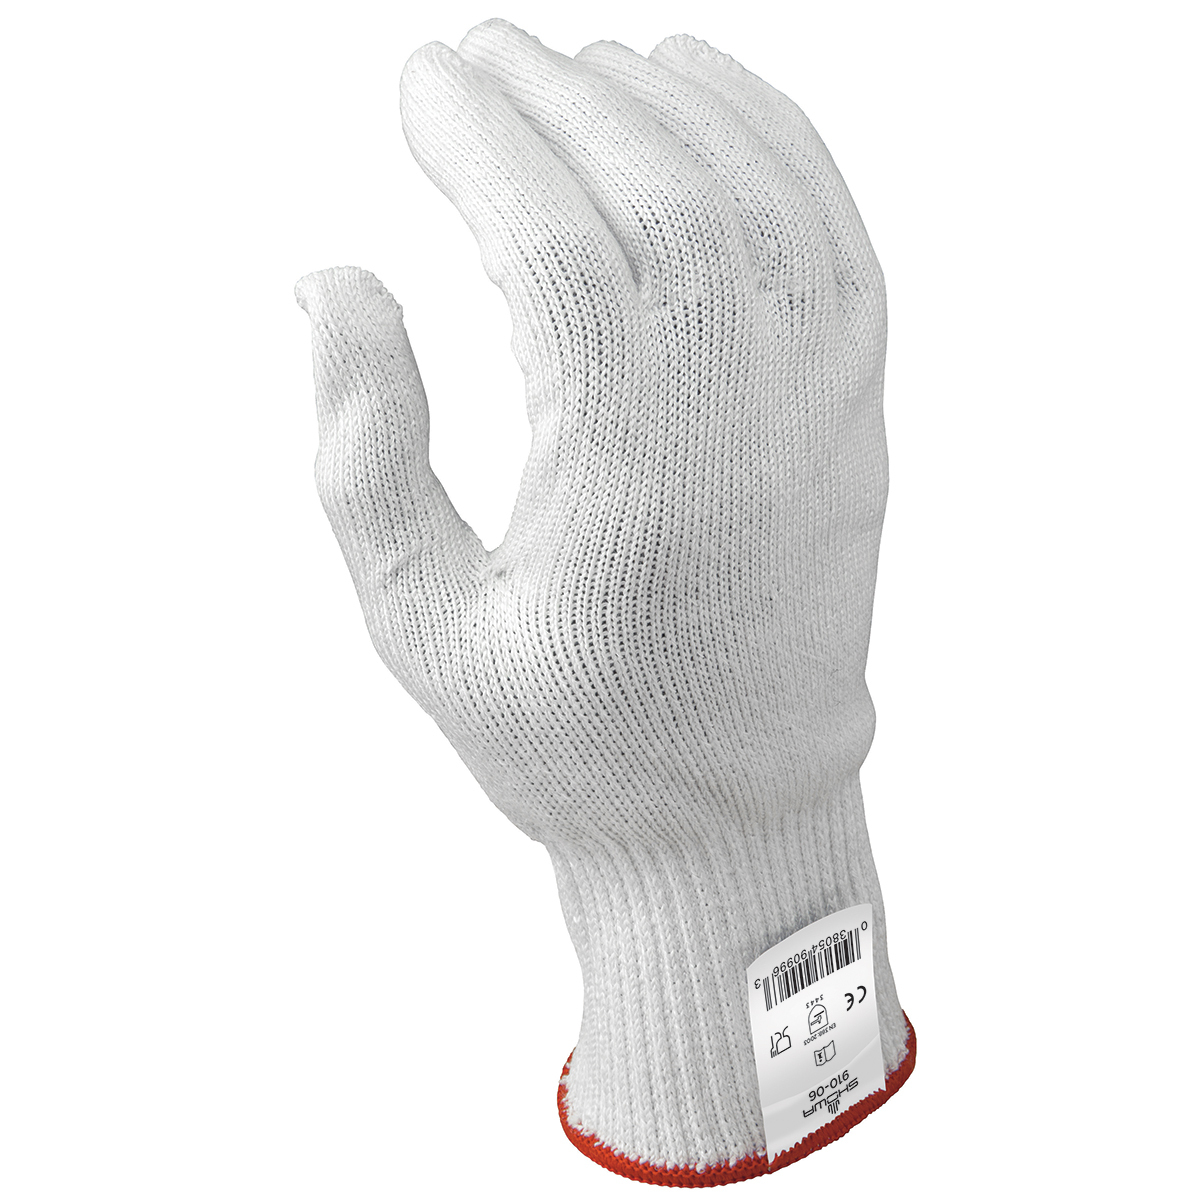 SHOWA® 910 13 Gauge High Performance Polyethylene And Stainless Steel Cut Resistant Gloves